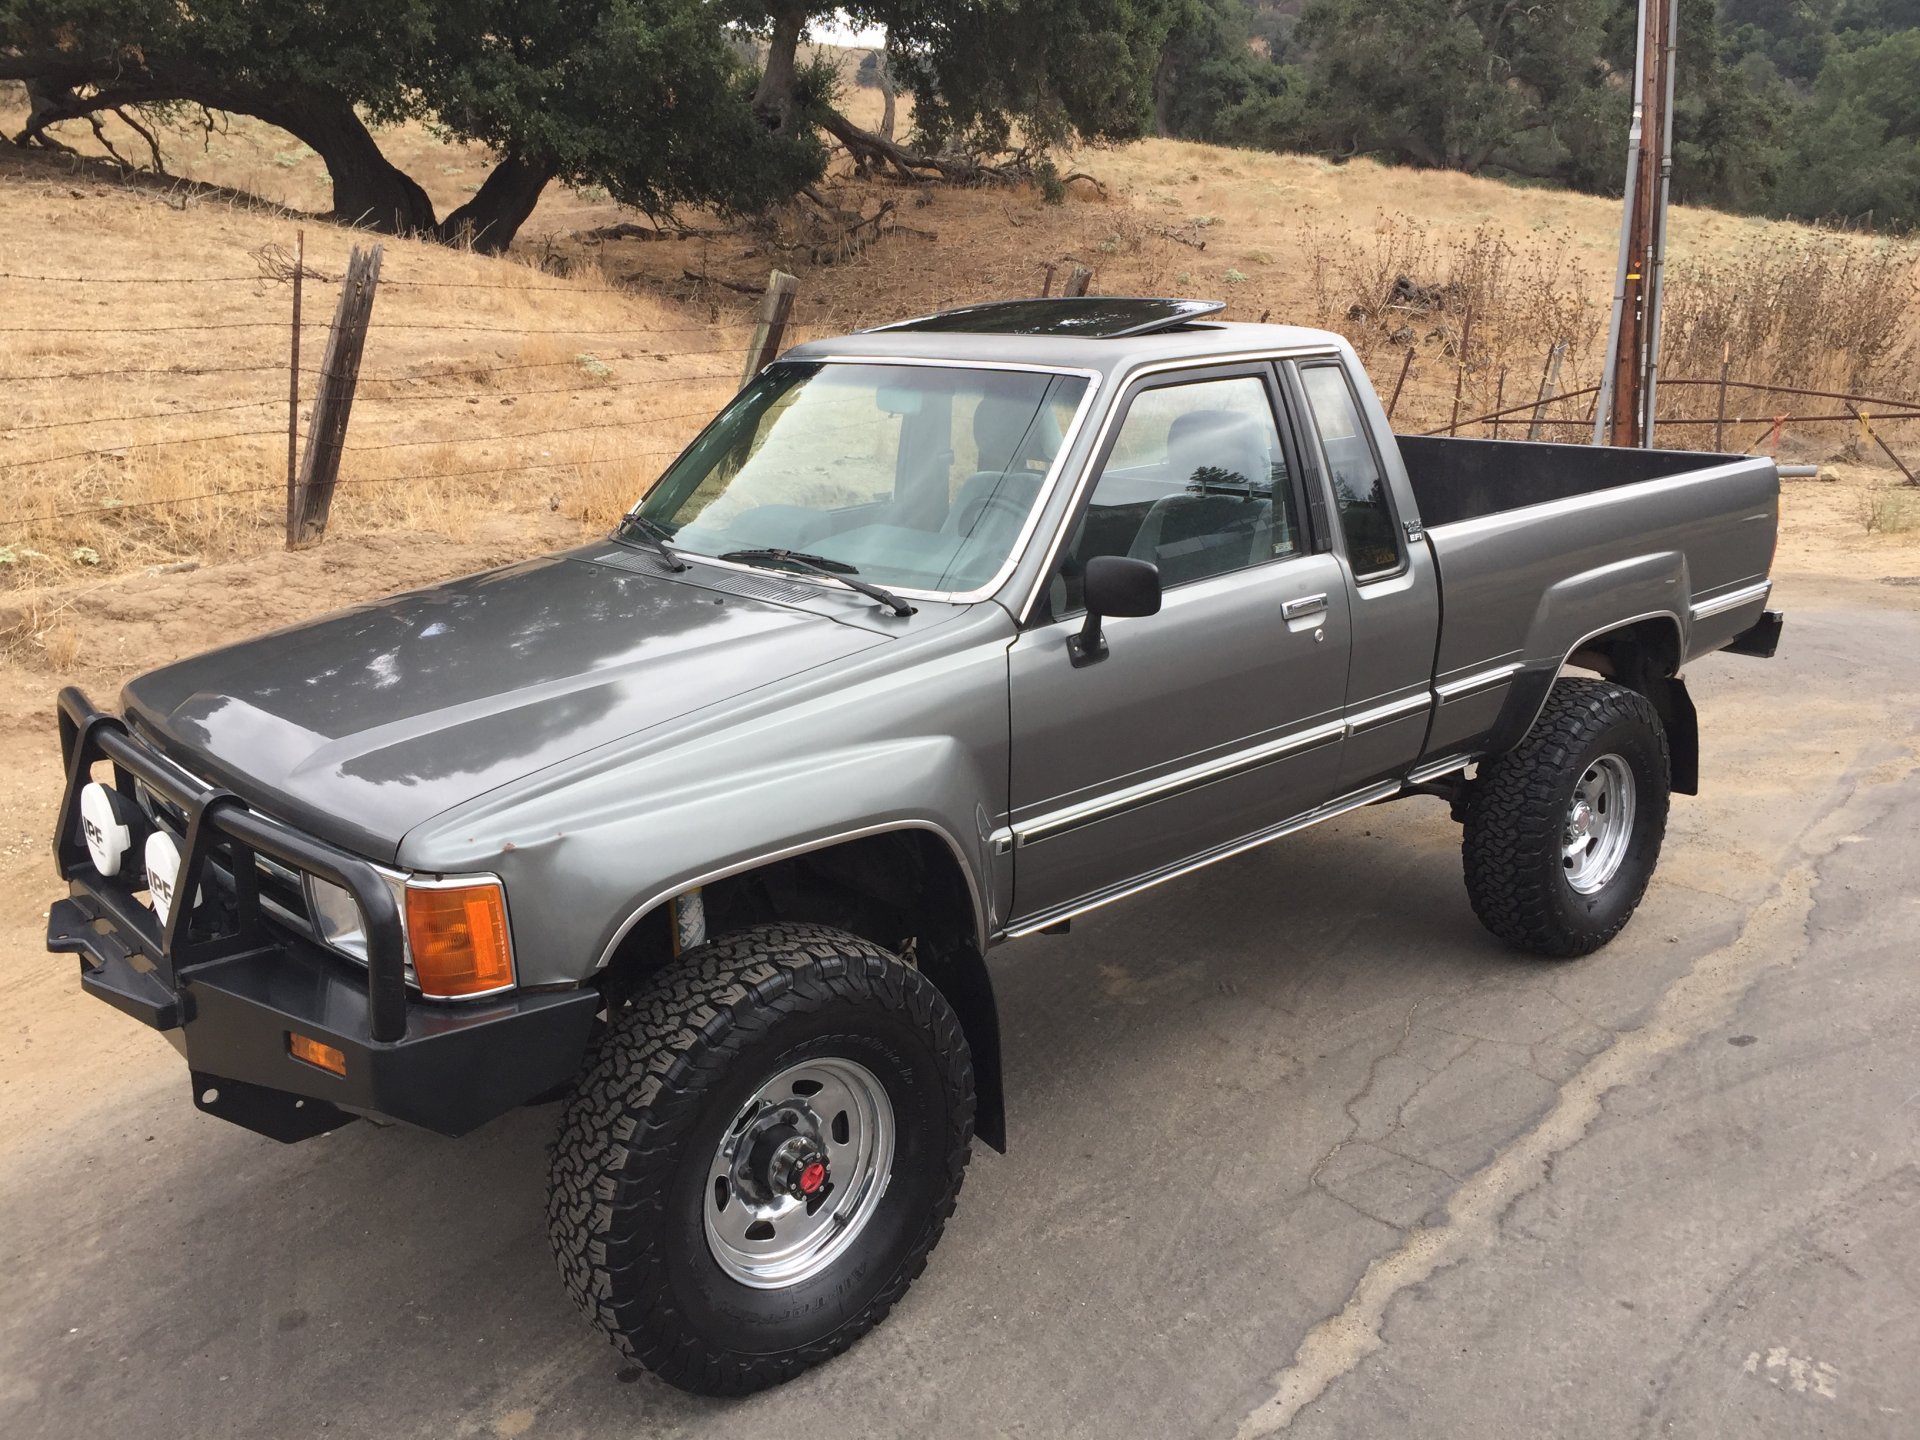 For Sale 1985 Toyota 4x4 Pickup Truck Solid Axle Efi 22re 4wd